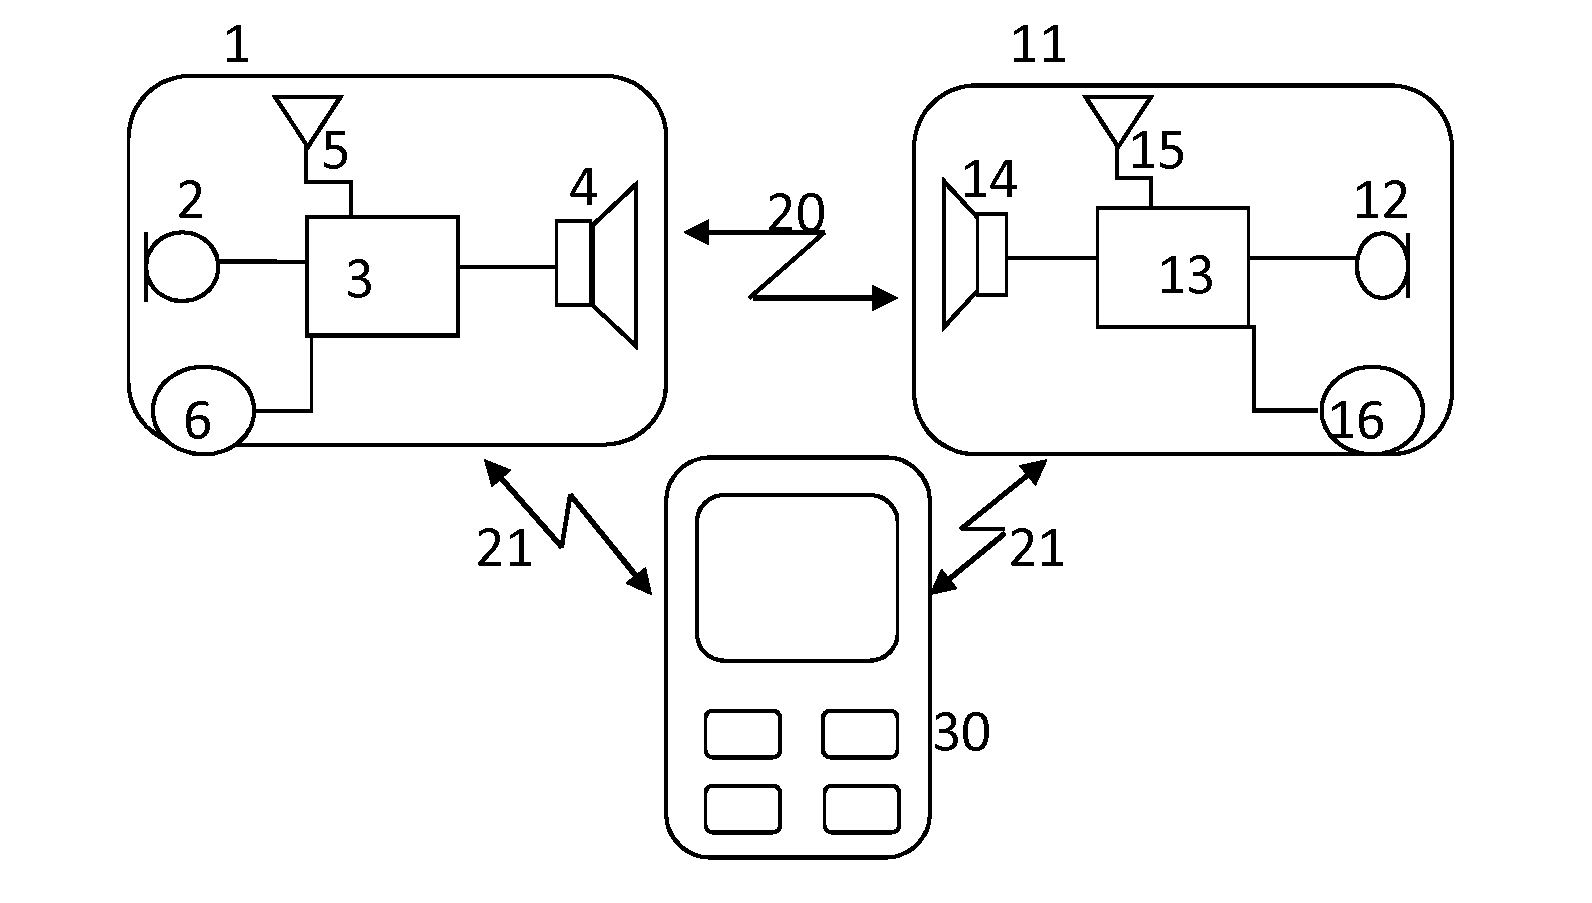 Hearing aid system with lost partner functionality